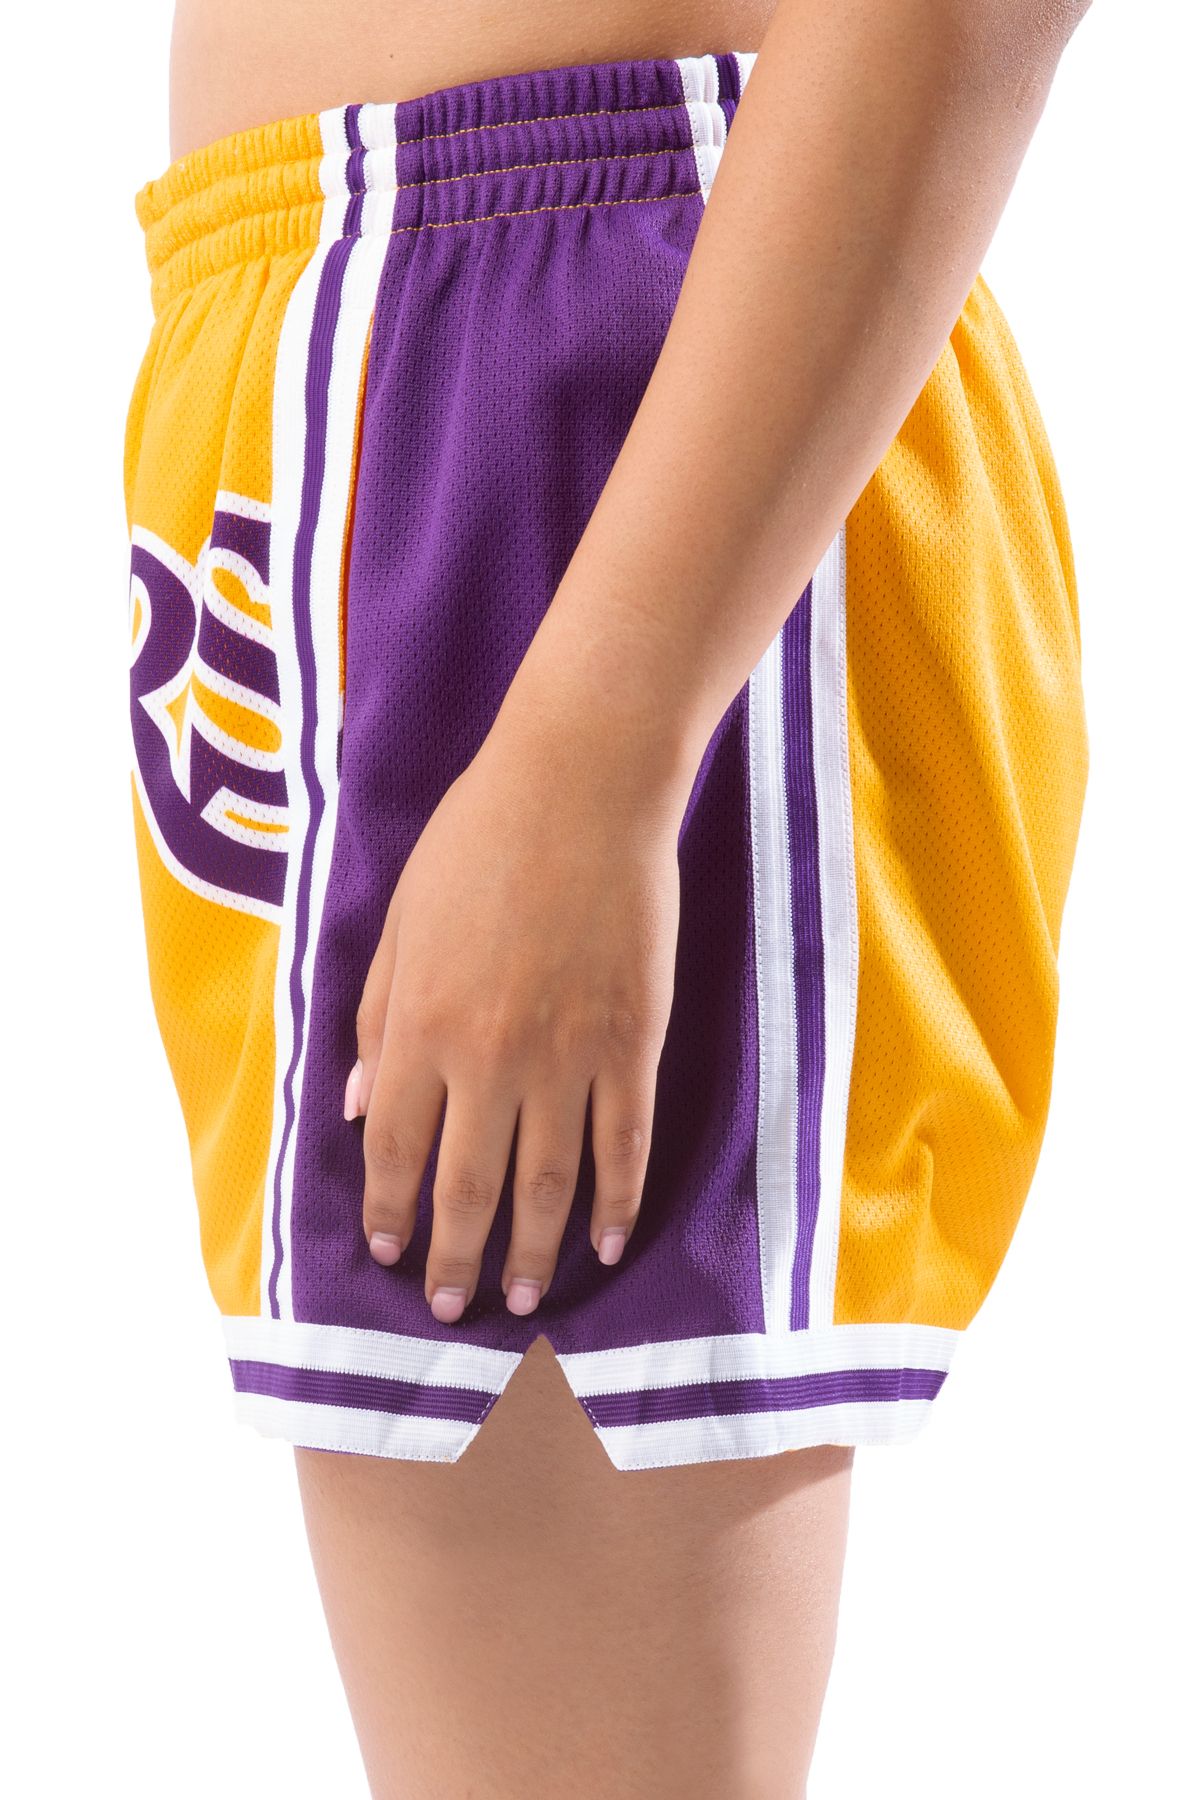 J23 iPhone App on X: M&N Lakers Big Face Shorts on Jimmy Jazz Link  ->   / X